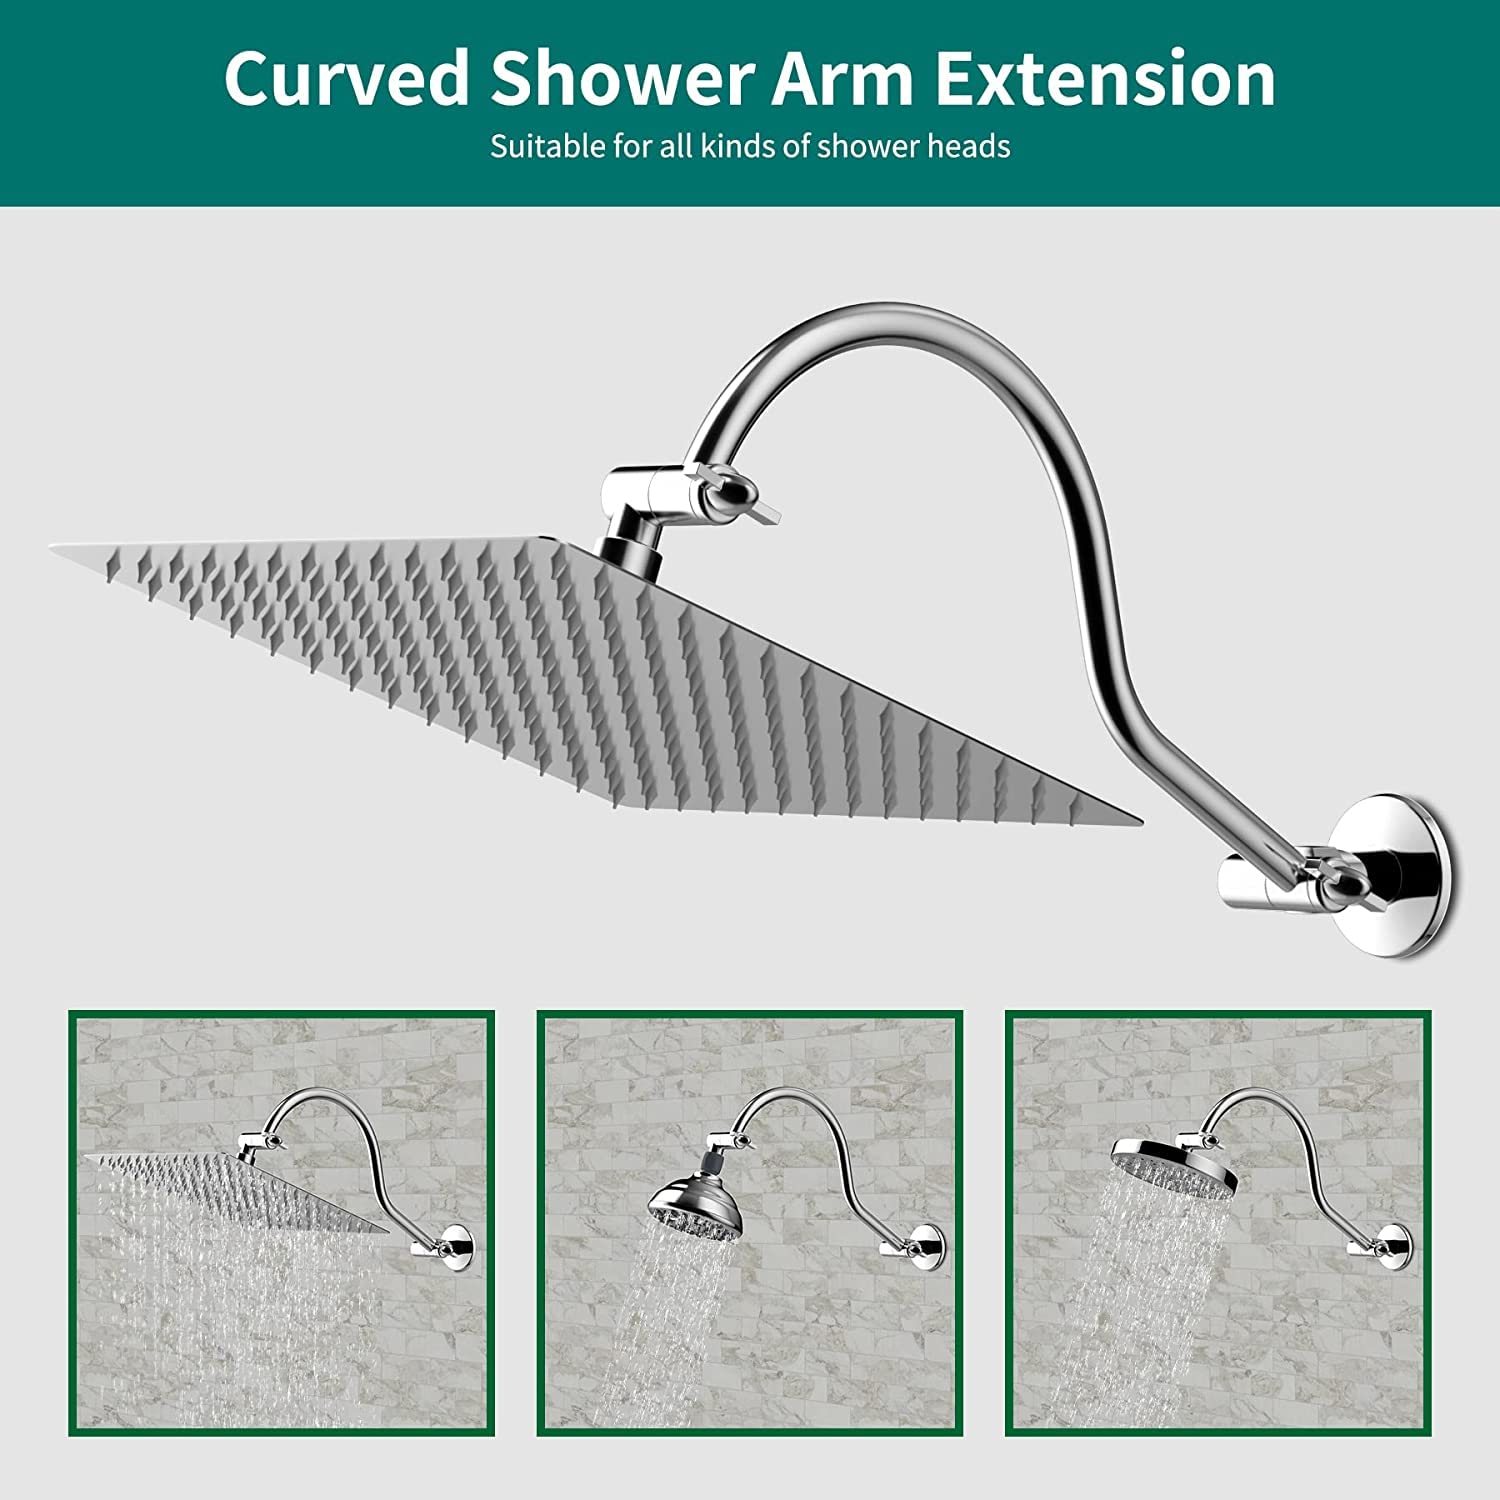 All Metal 16 Inch Solid Brass Adjustable Curved Shower Head Extension Arm Flexible Height & Angle Shower Arm Extender with Lock Joints,Universal Connection Stainless Steel Pipe Height Extending,Chrome